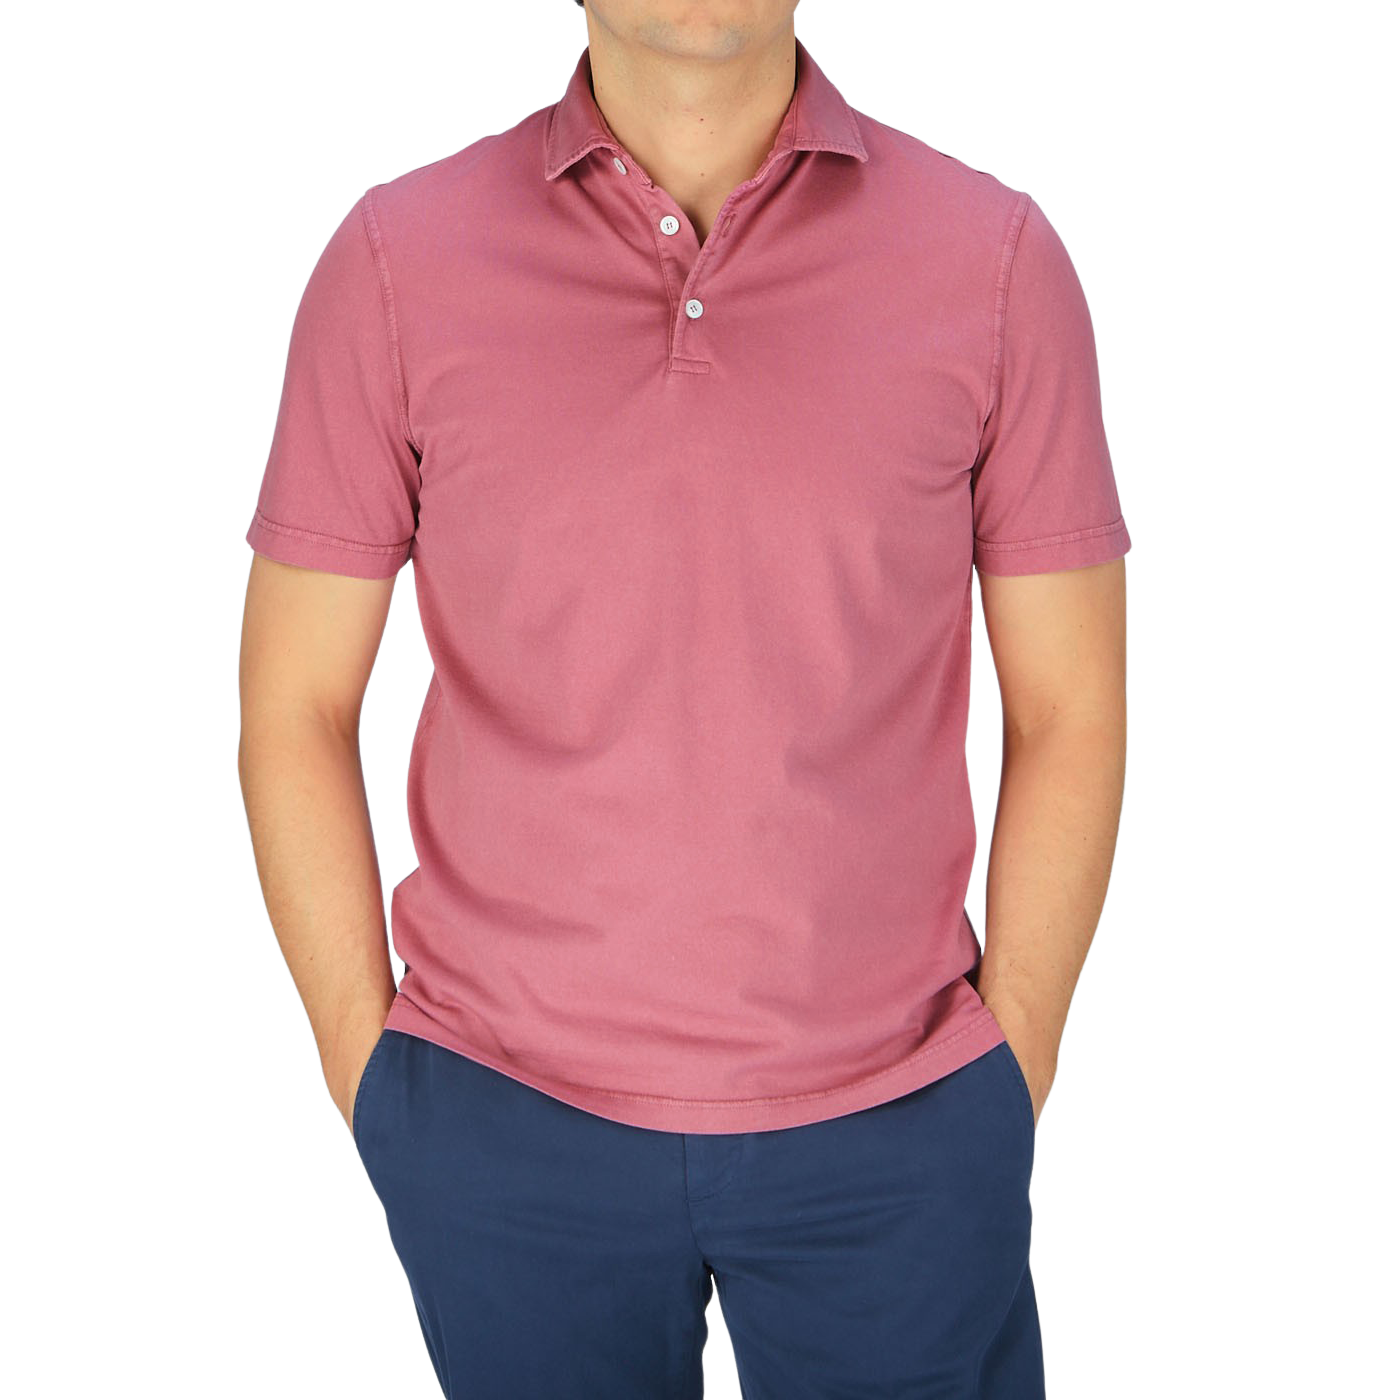 A man wearing a Fedeli washed raspberry organic cotton polo shirt and blue pants.